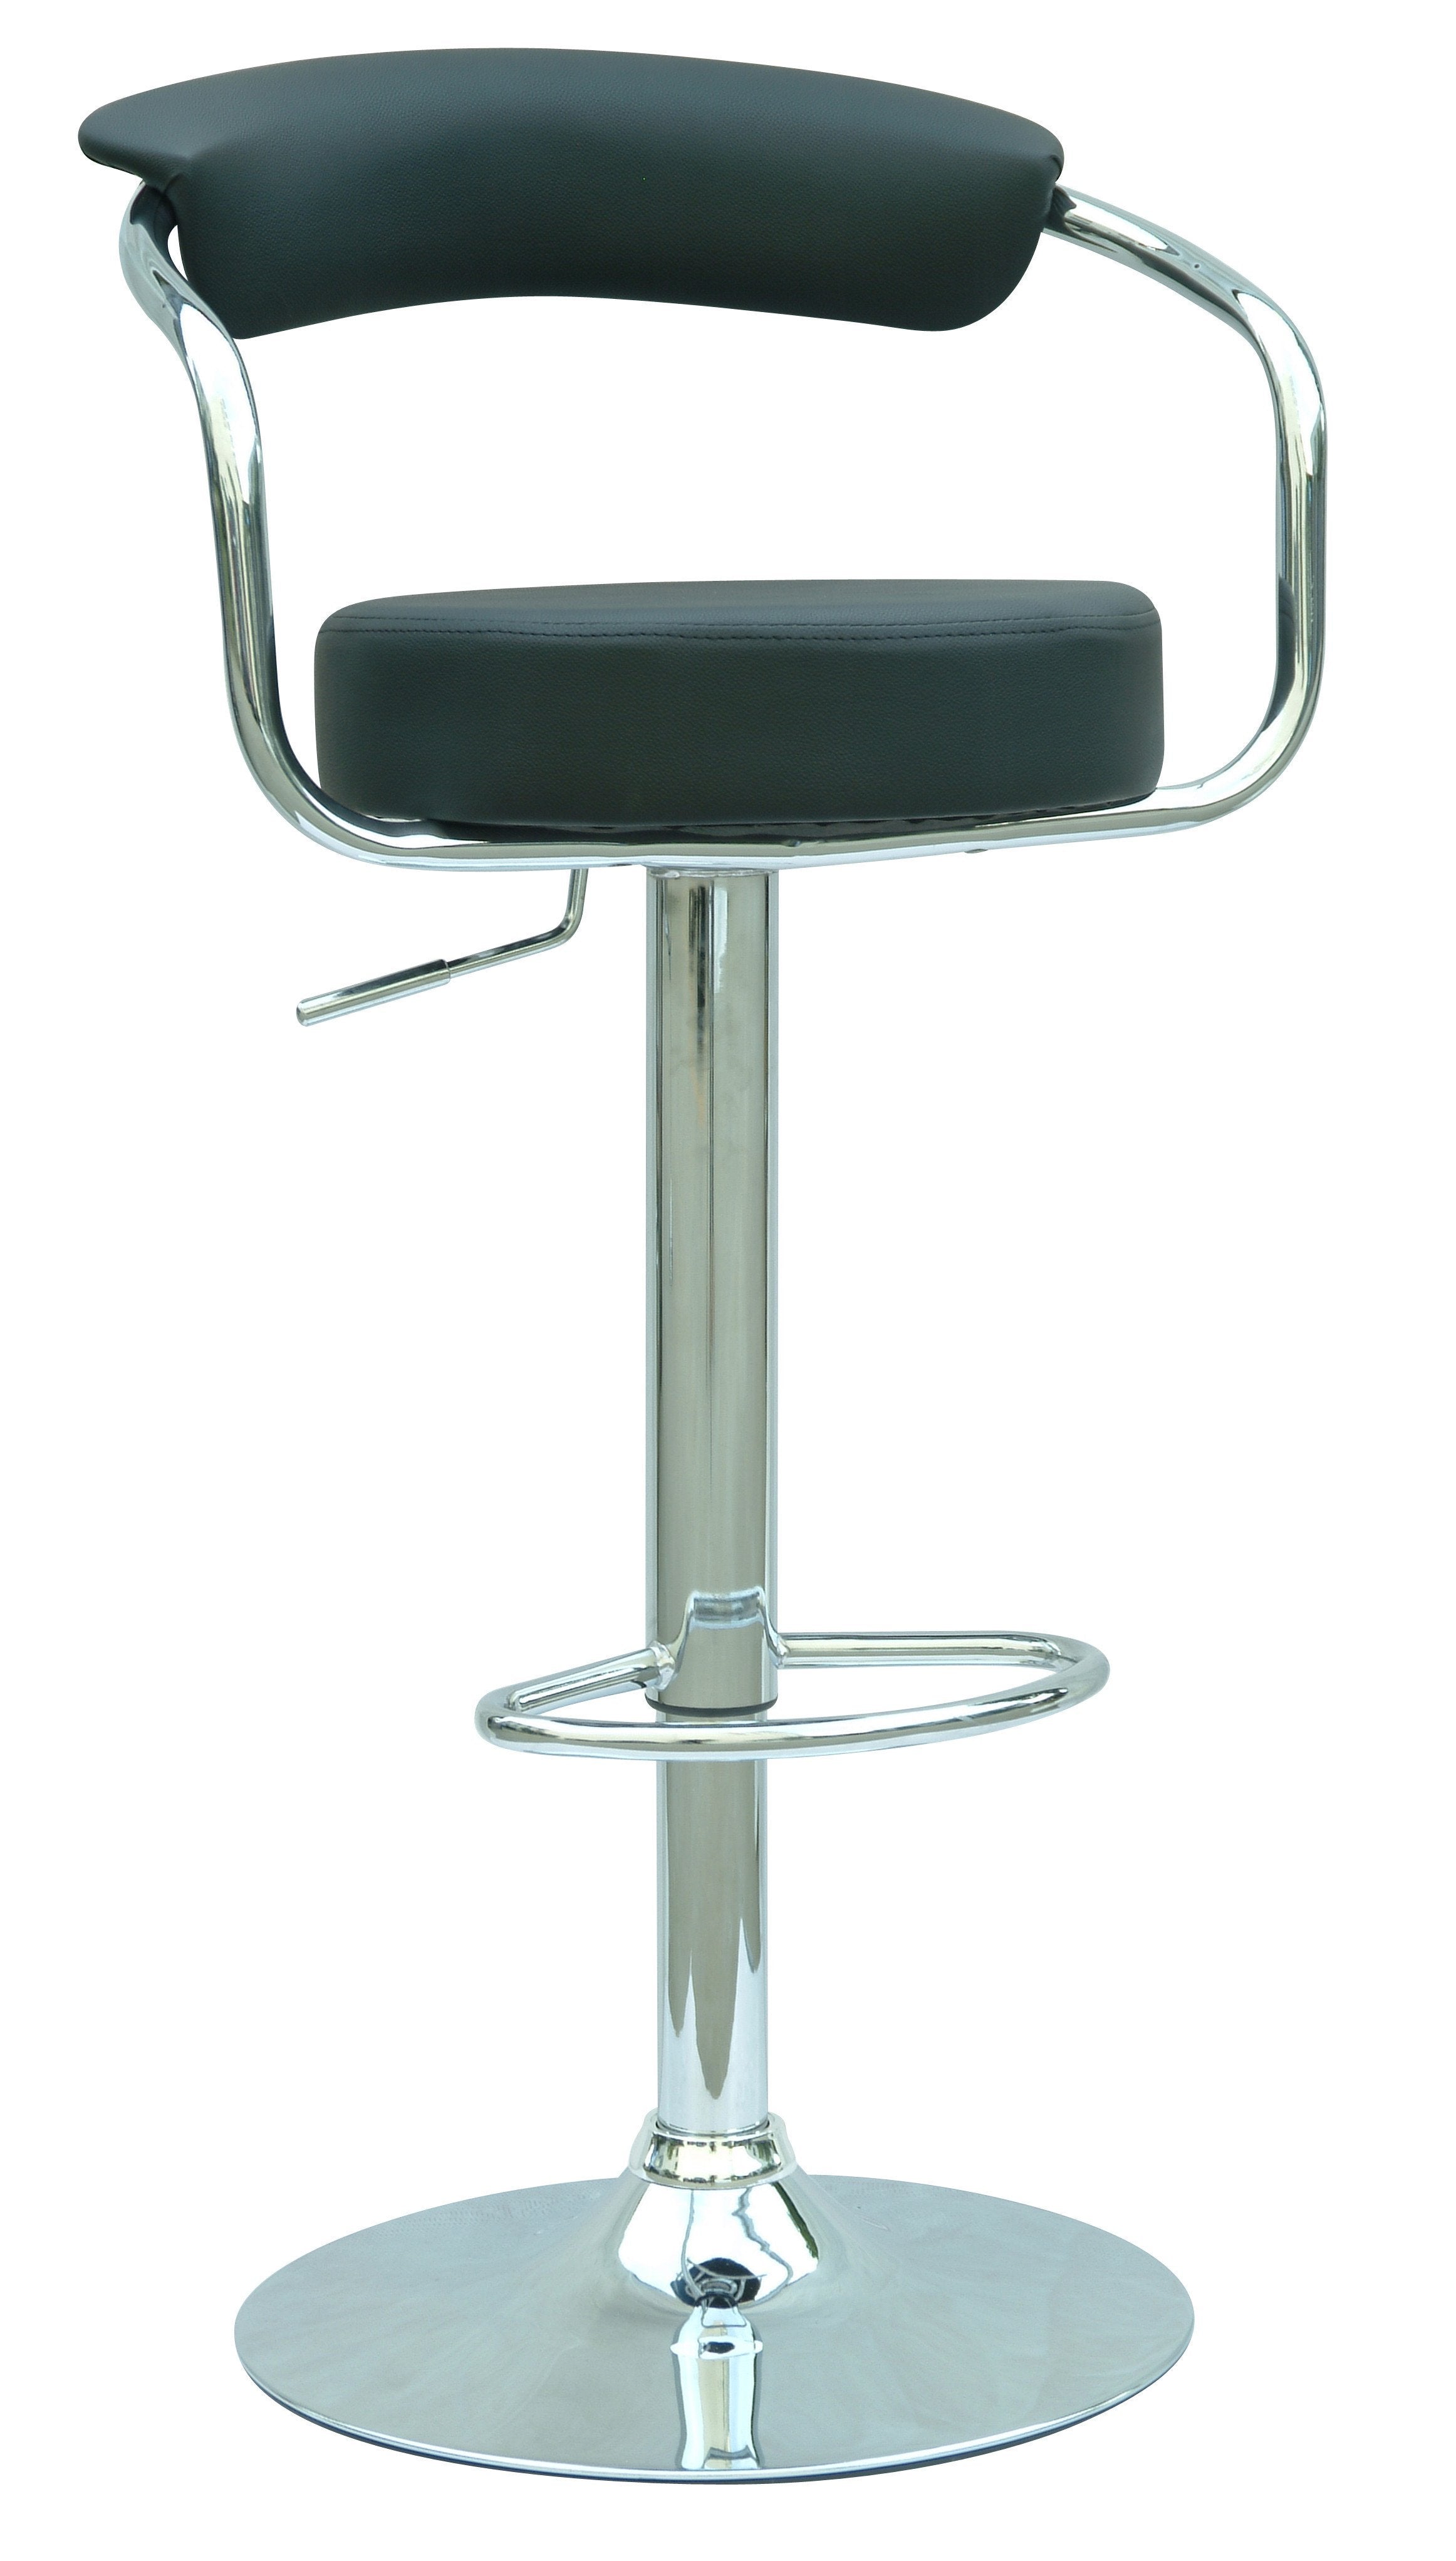 Chintaly 0326-as-blk Pneumatic Gas Lift Adjustable Height Swivel Stool